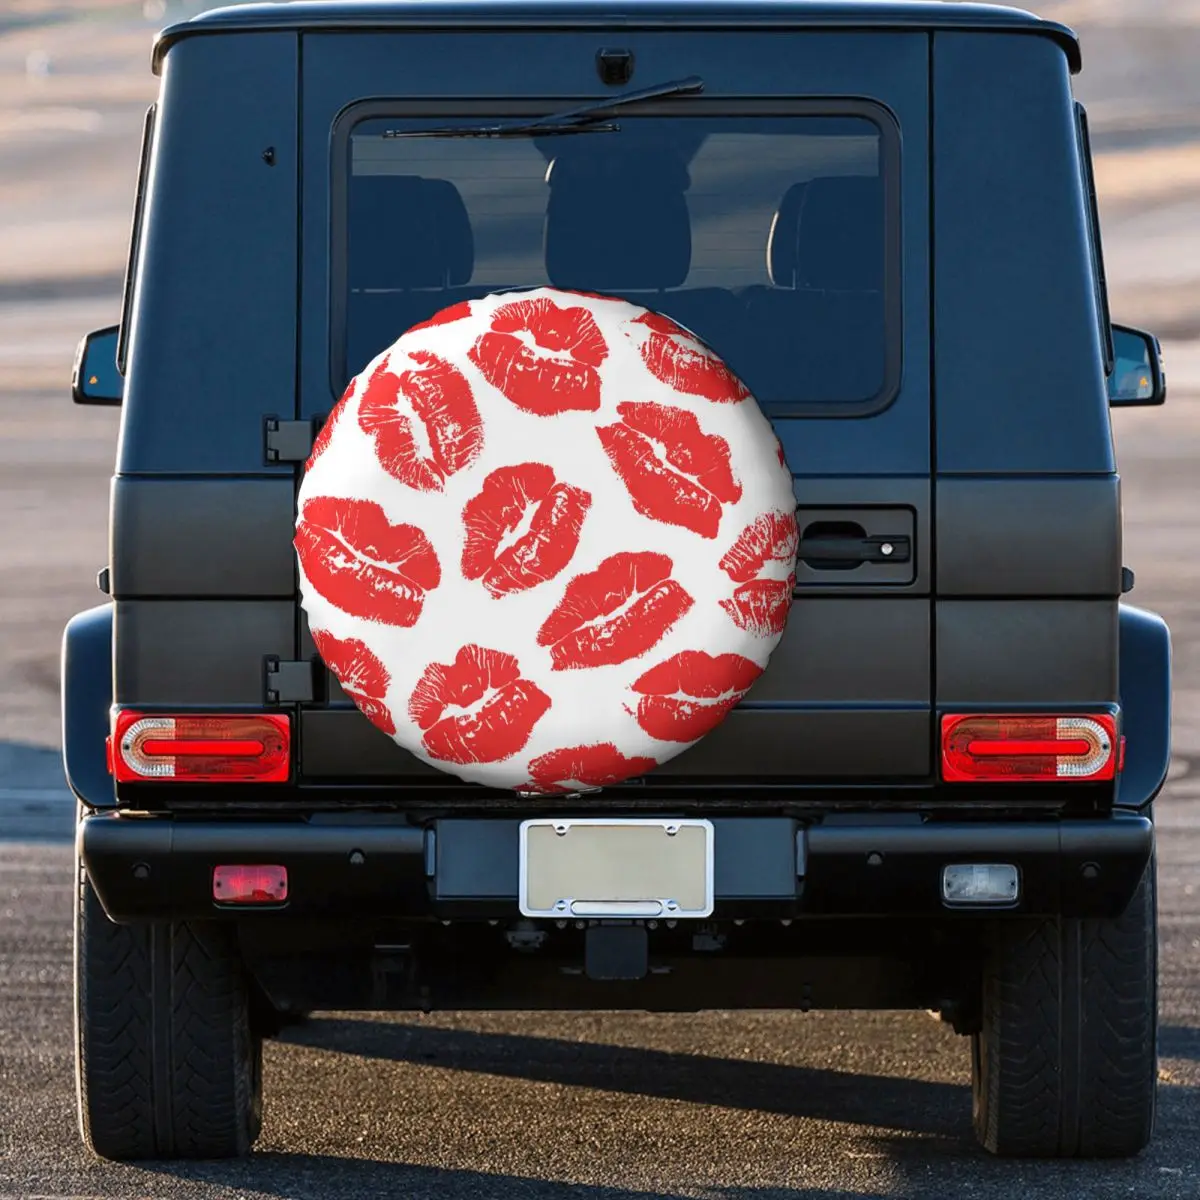 

Imprint Kiss Red Lips Tire Cover Wheel Protectors Weatherproof Universal for Jeep Trailer RV SUV Truck Camper Travel Trailer